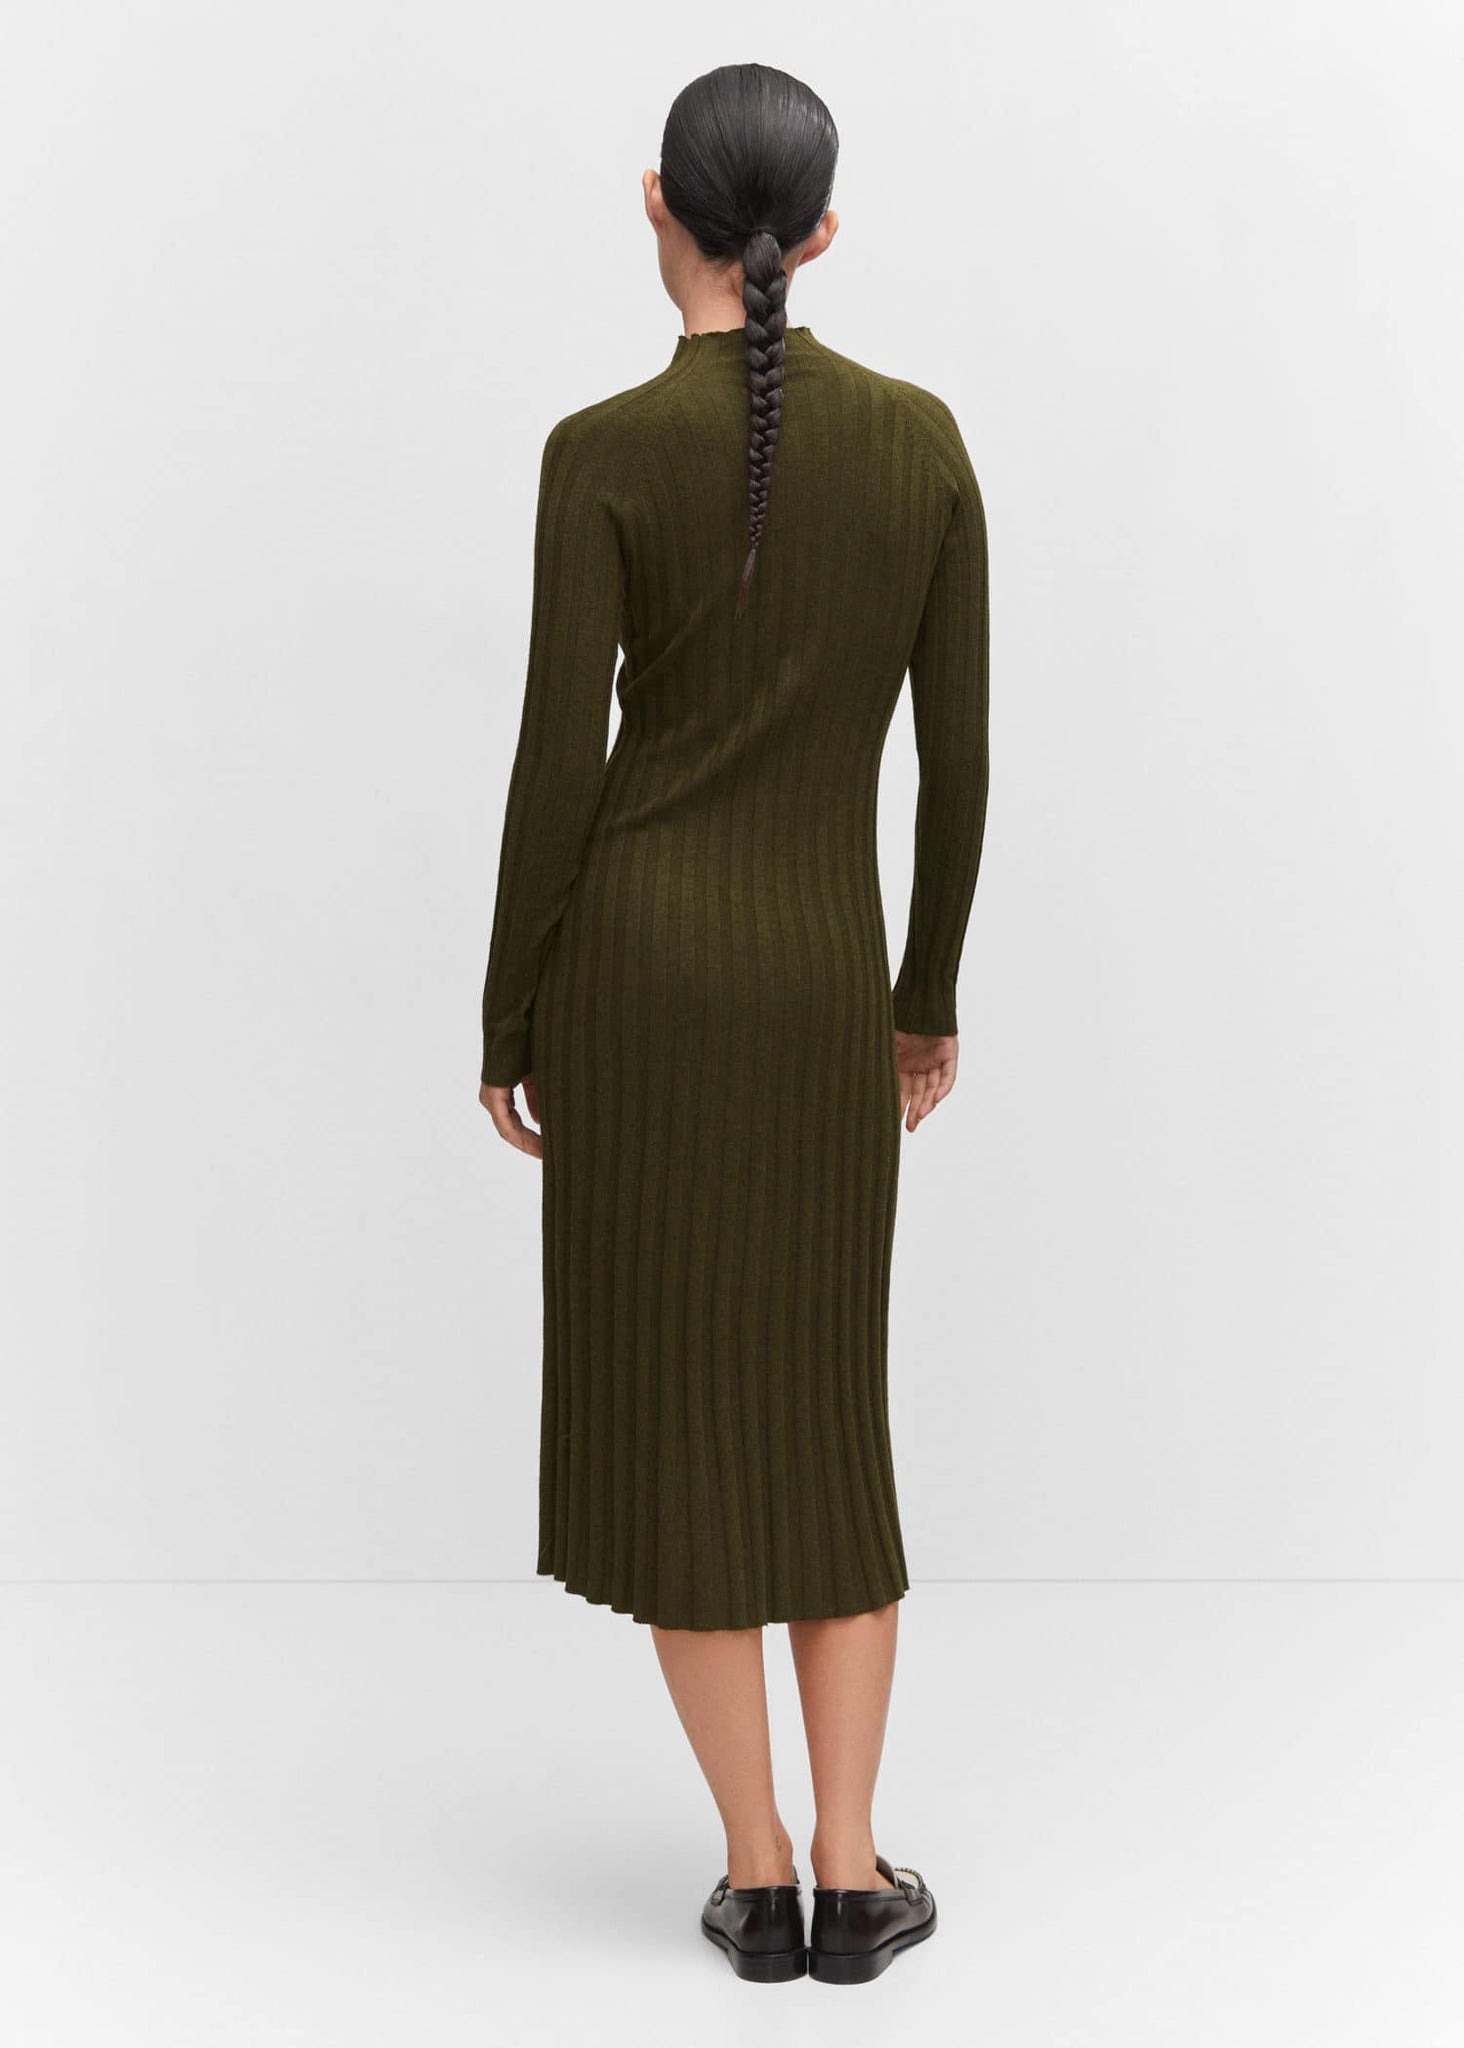 Perkins-neck ribbed dress - Reverse of the article